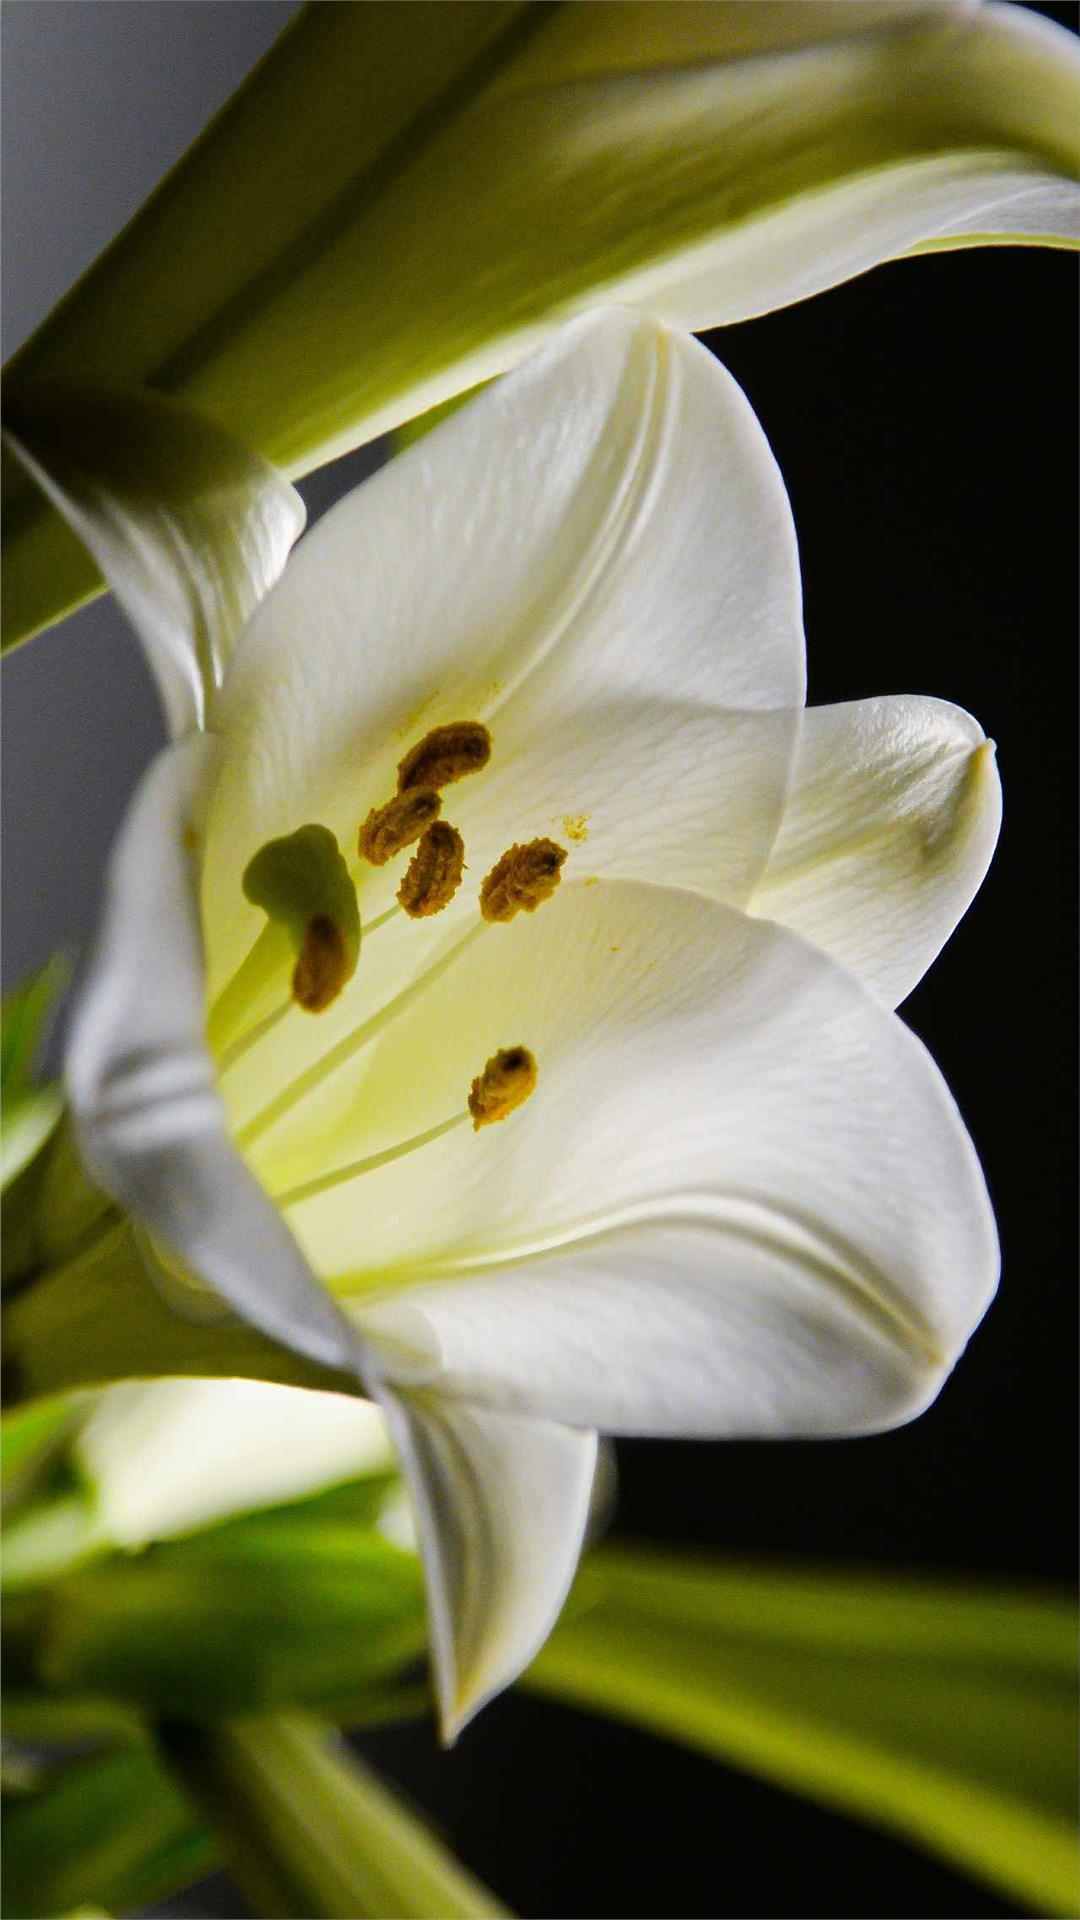 Lily Flower iPhone Wallpaper